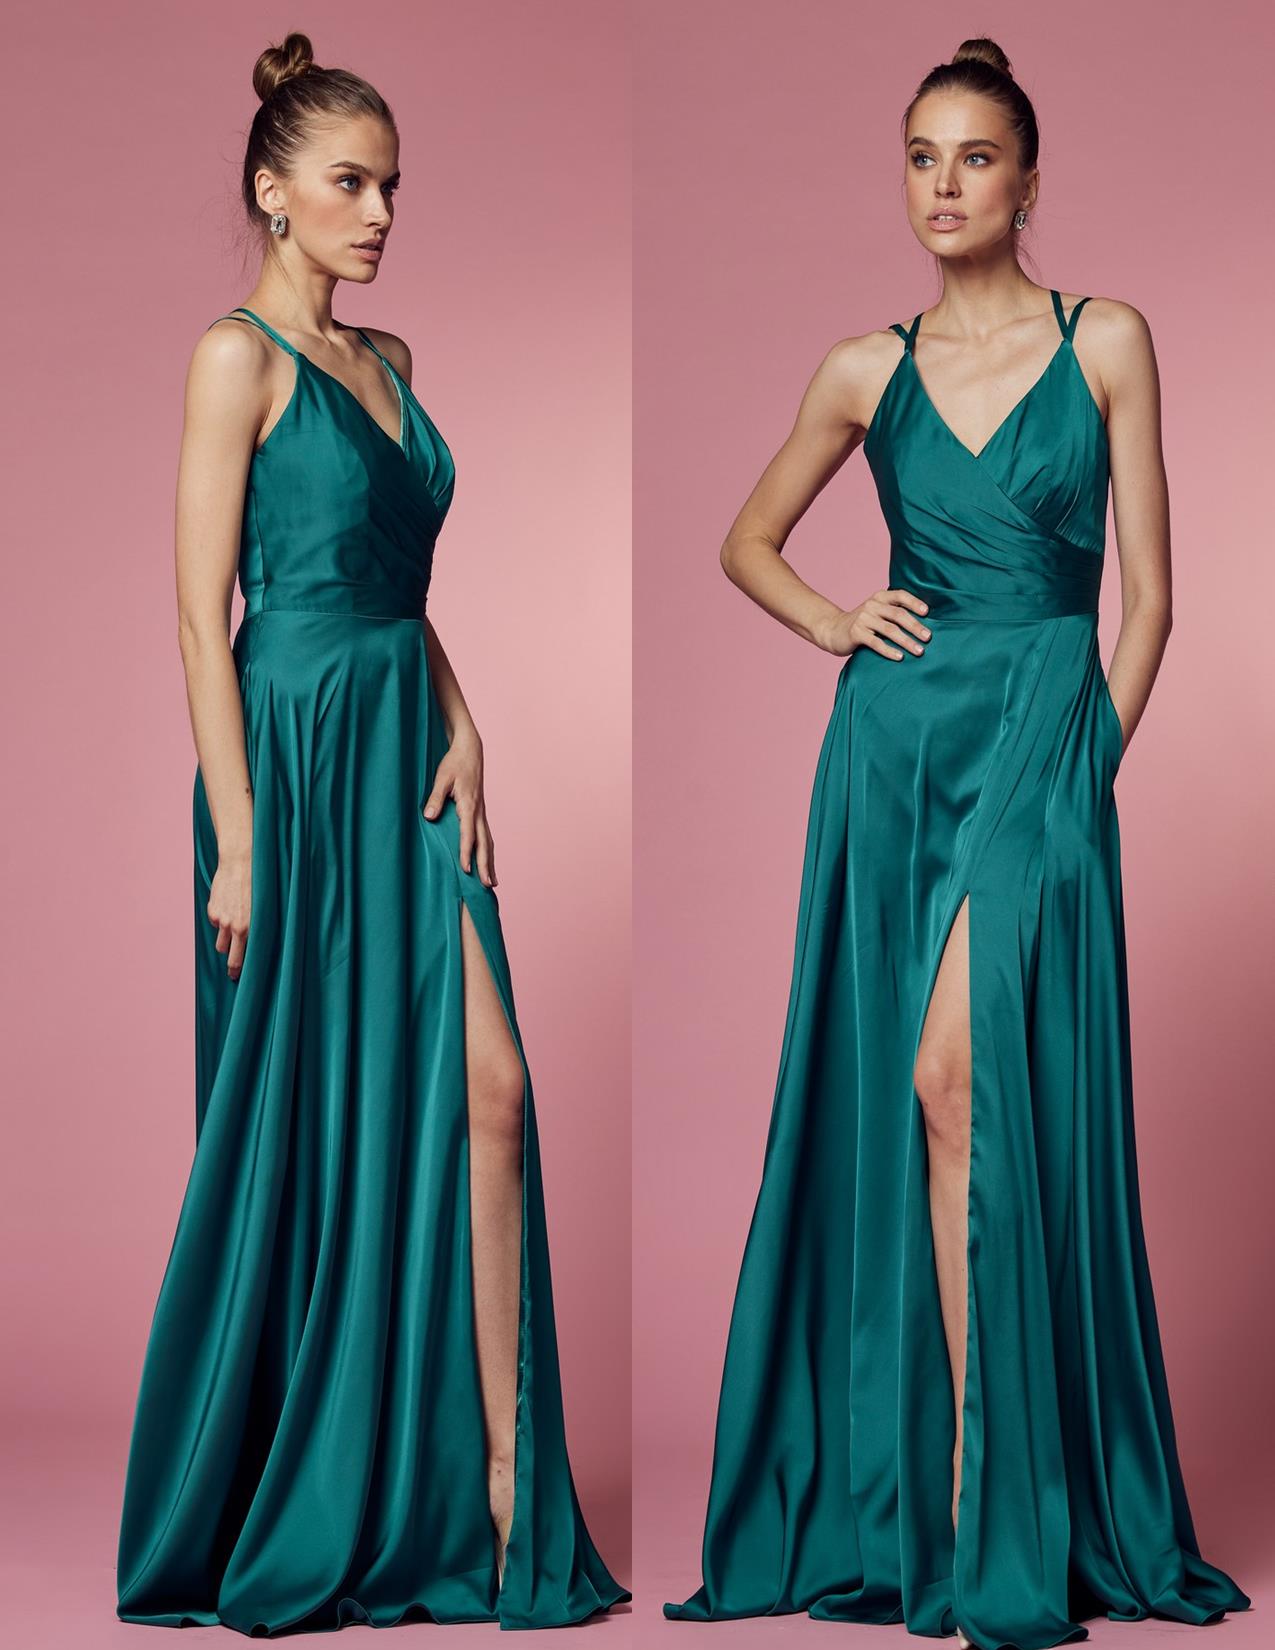 A -Line Satin Gown in Hunter Green A0201HG - After Hours Boutique